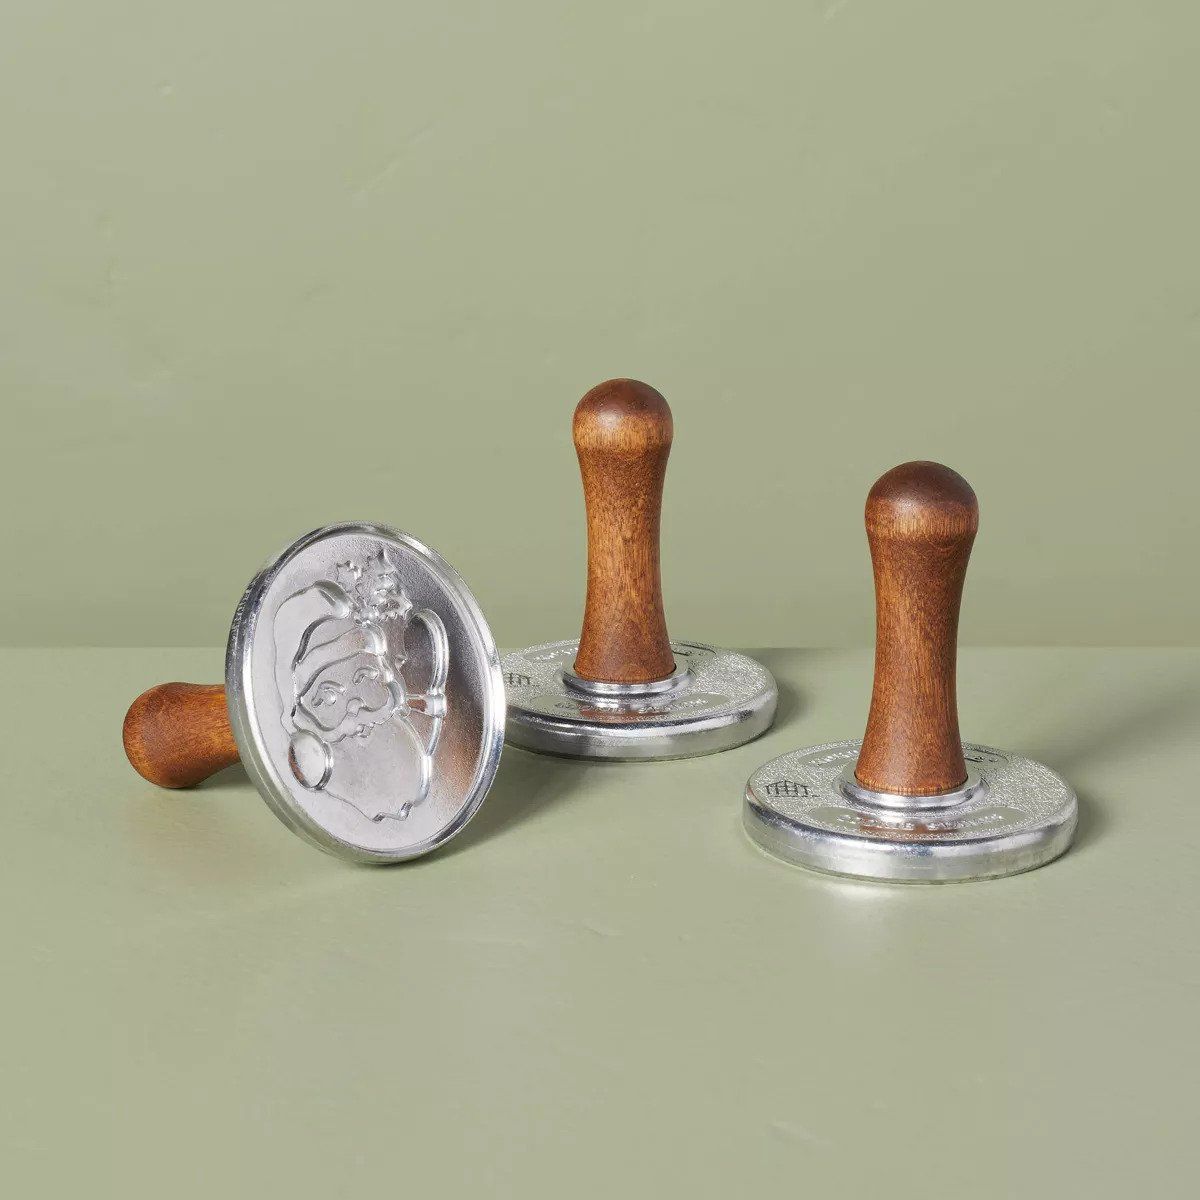 A set of three cookie stamps with wood handles. One is on its side to display a Santa engraving.